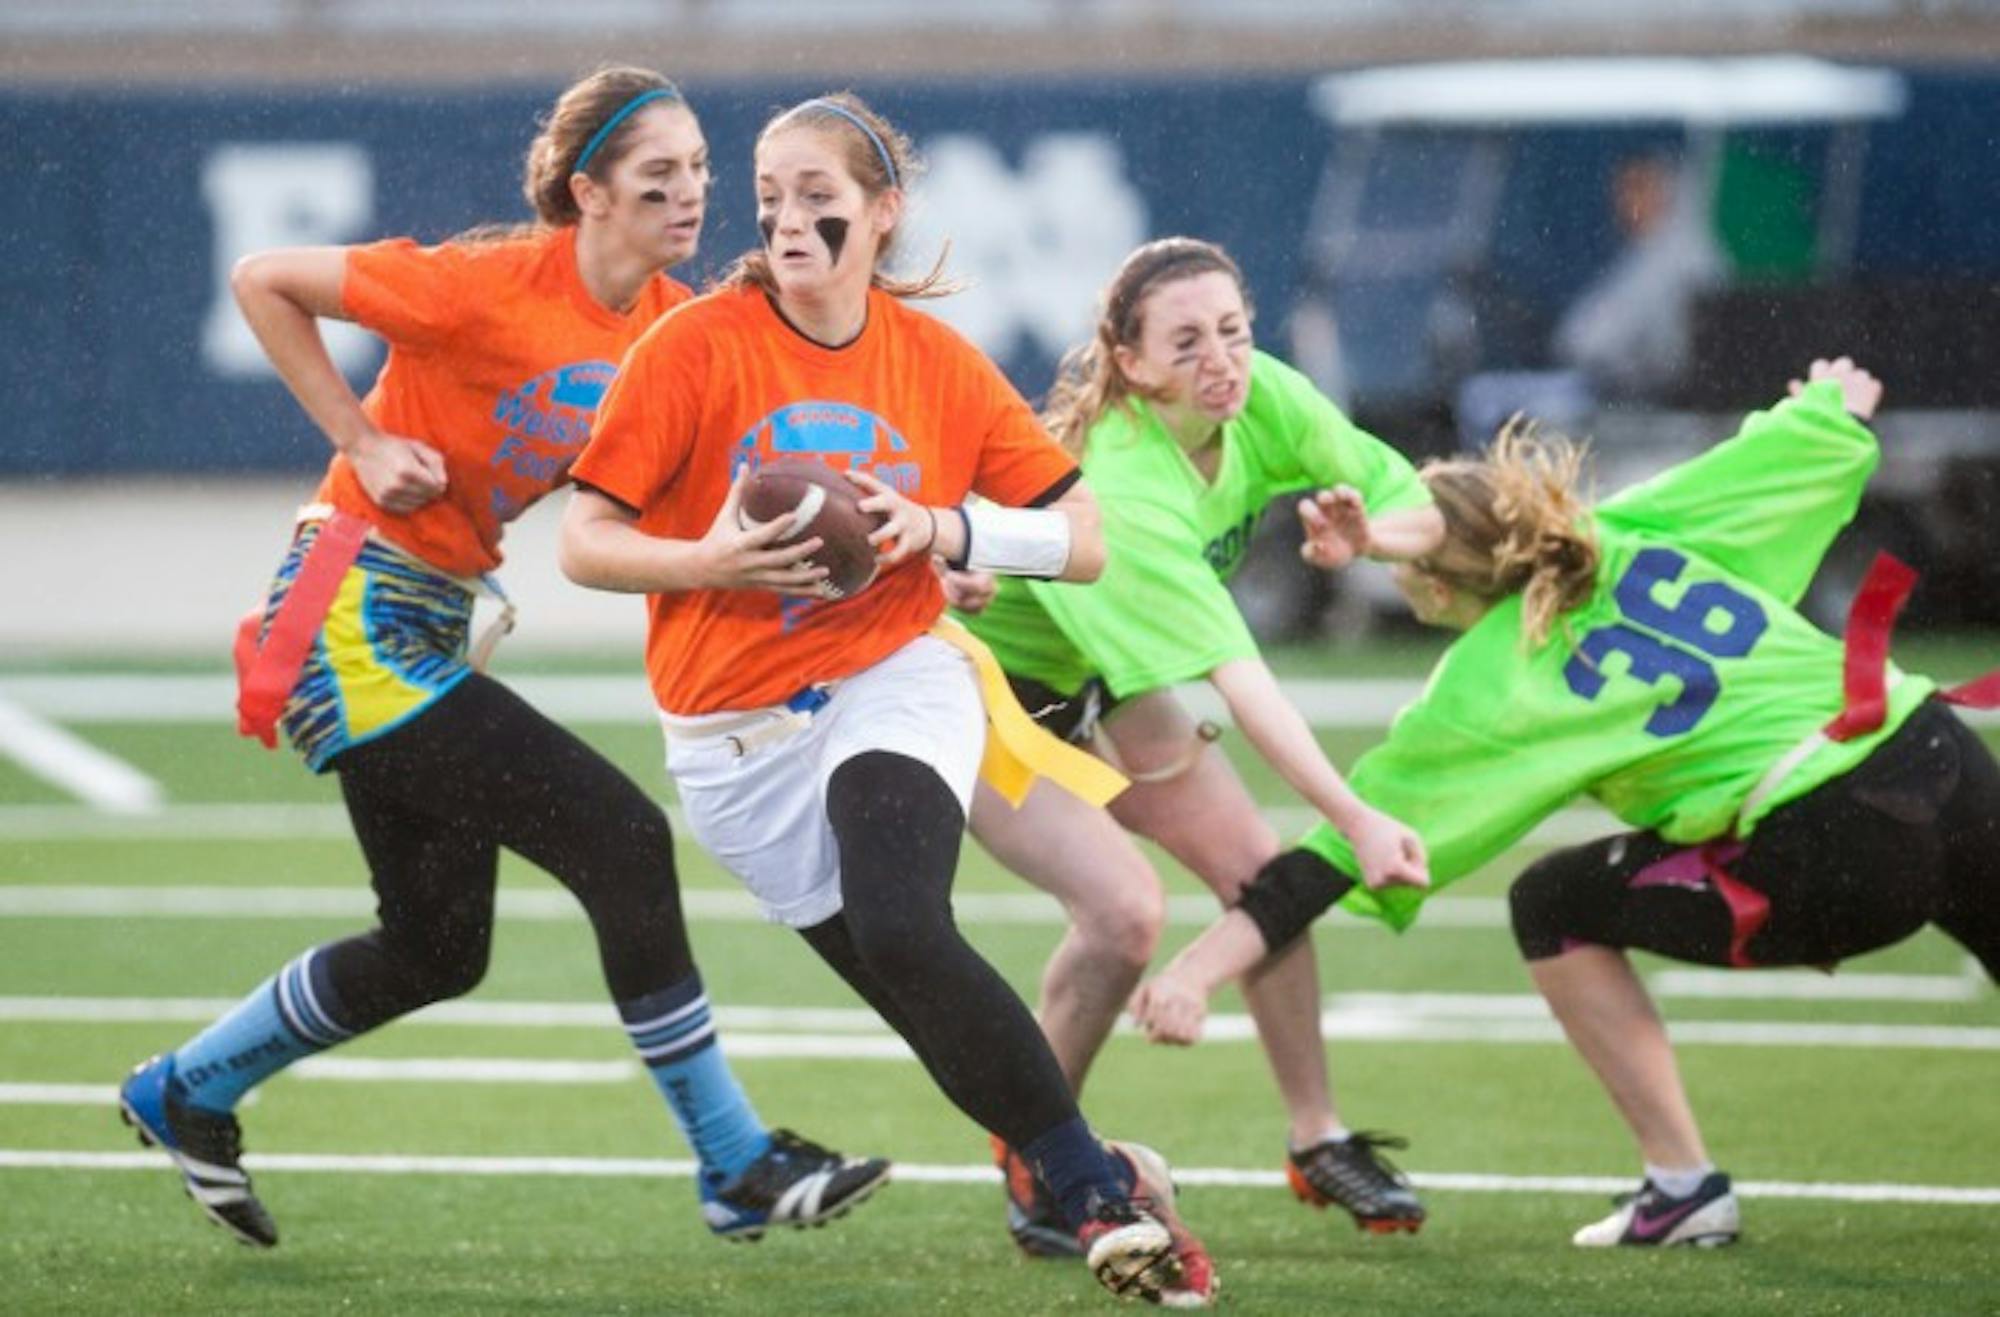 A student representing Welsh Family Hall evades a defender from Pangborn Hall during a women's interhall flag football championship in Notre Dame Stadium in Nov. 2014.